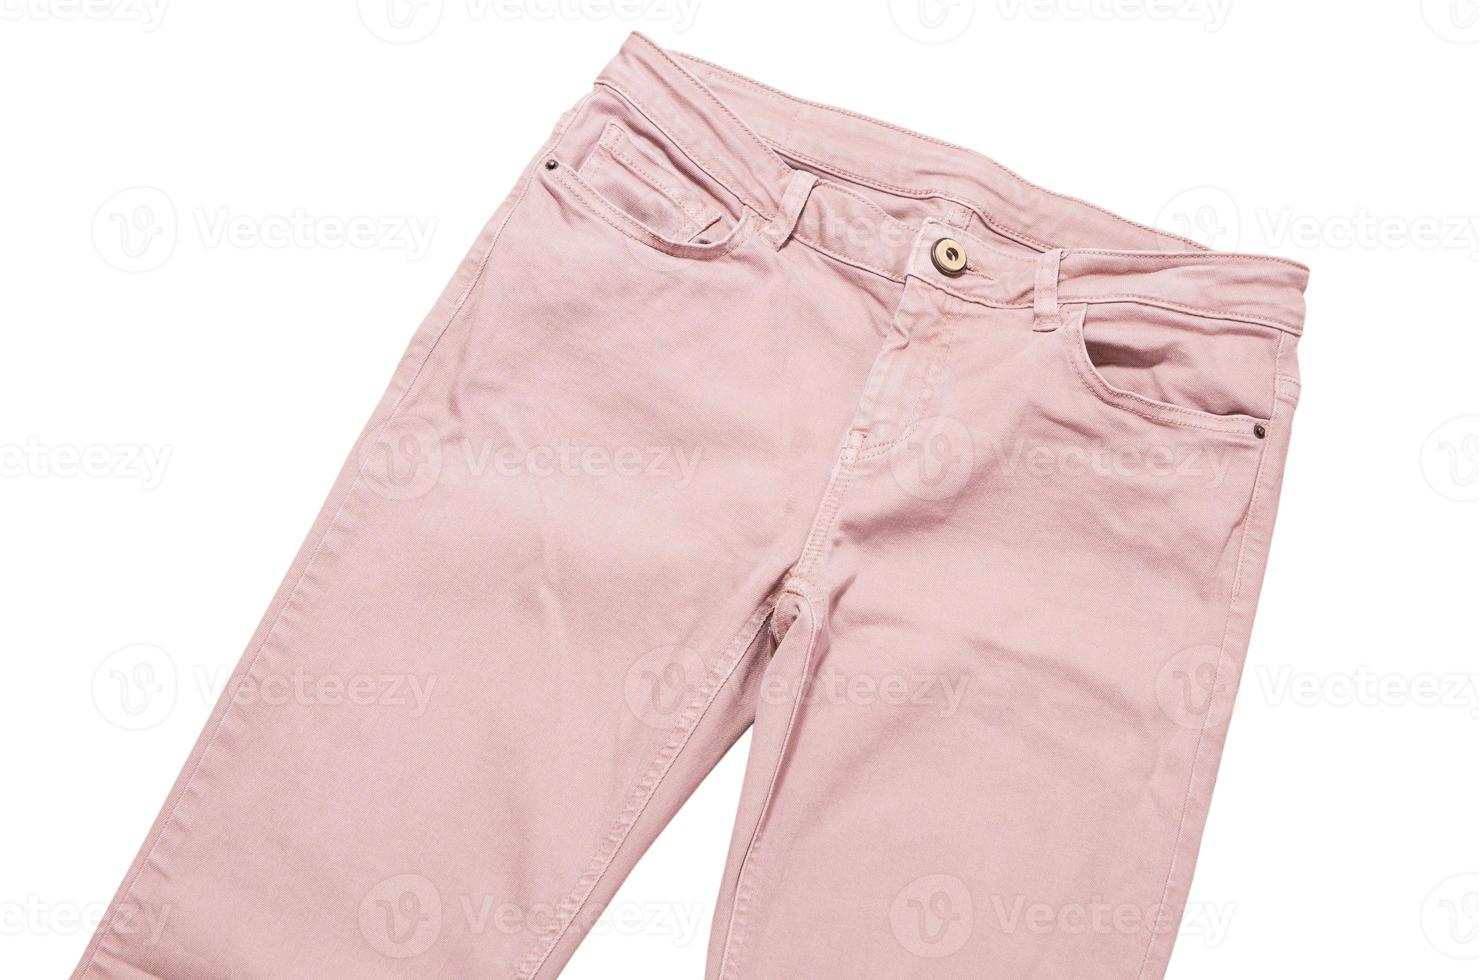 Female pants, light pink denim pants top view isolated on white background, folded slim pants photo